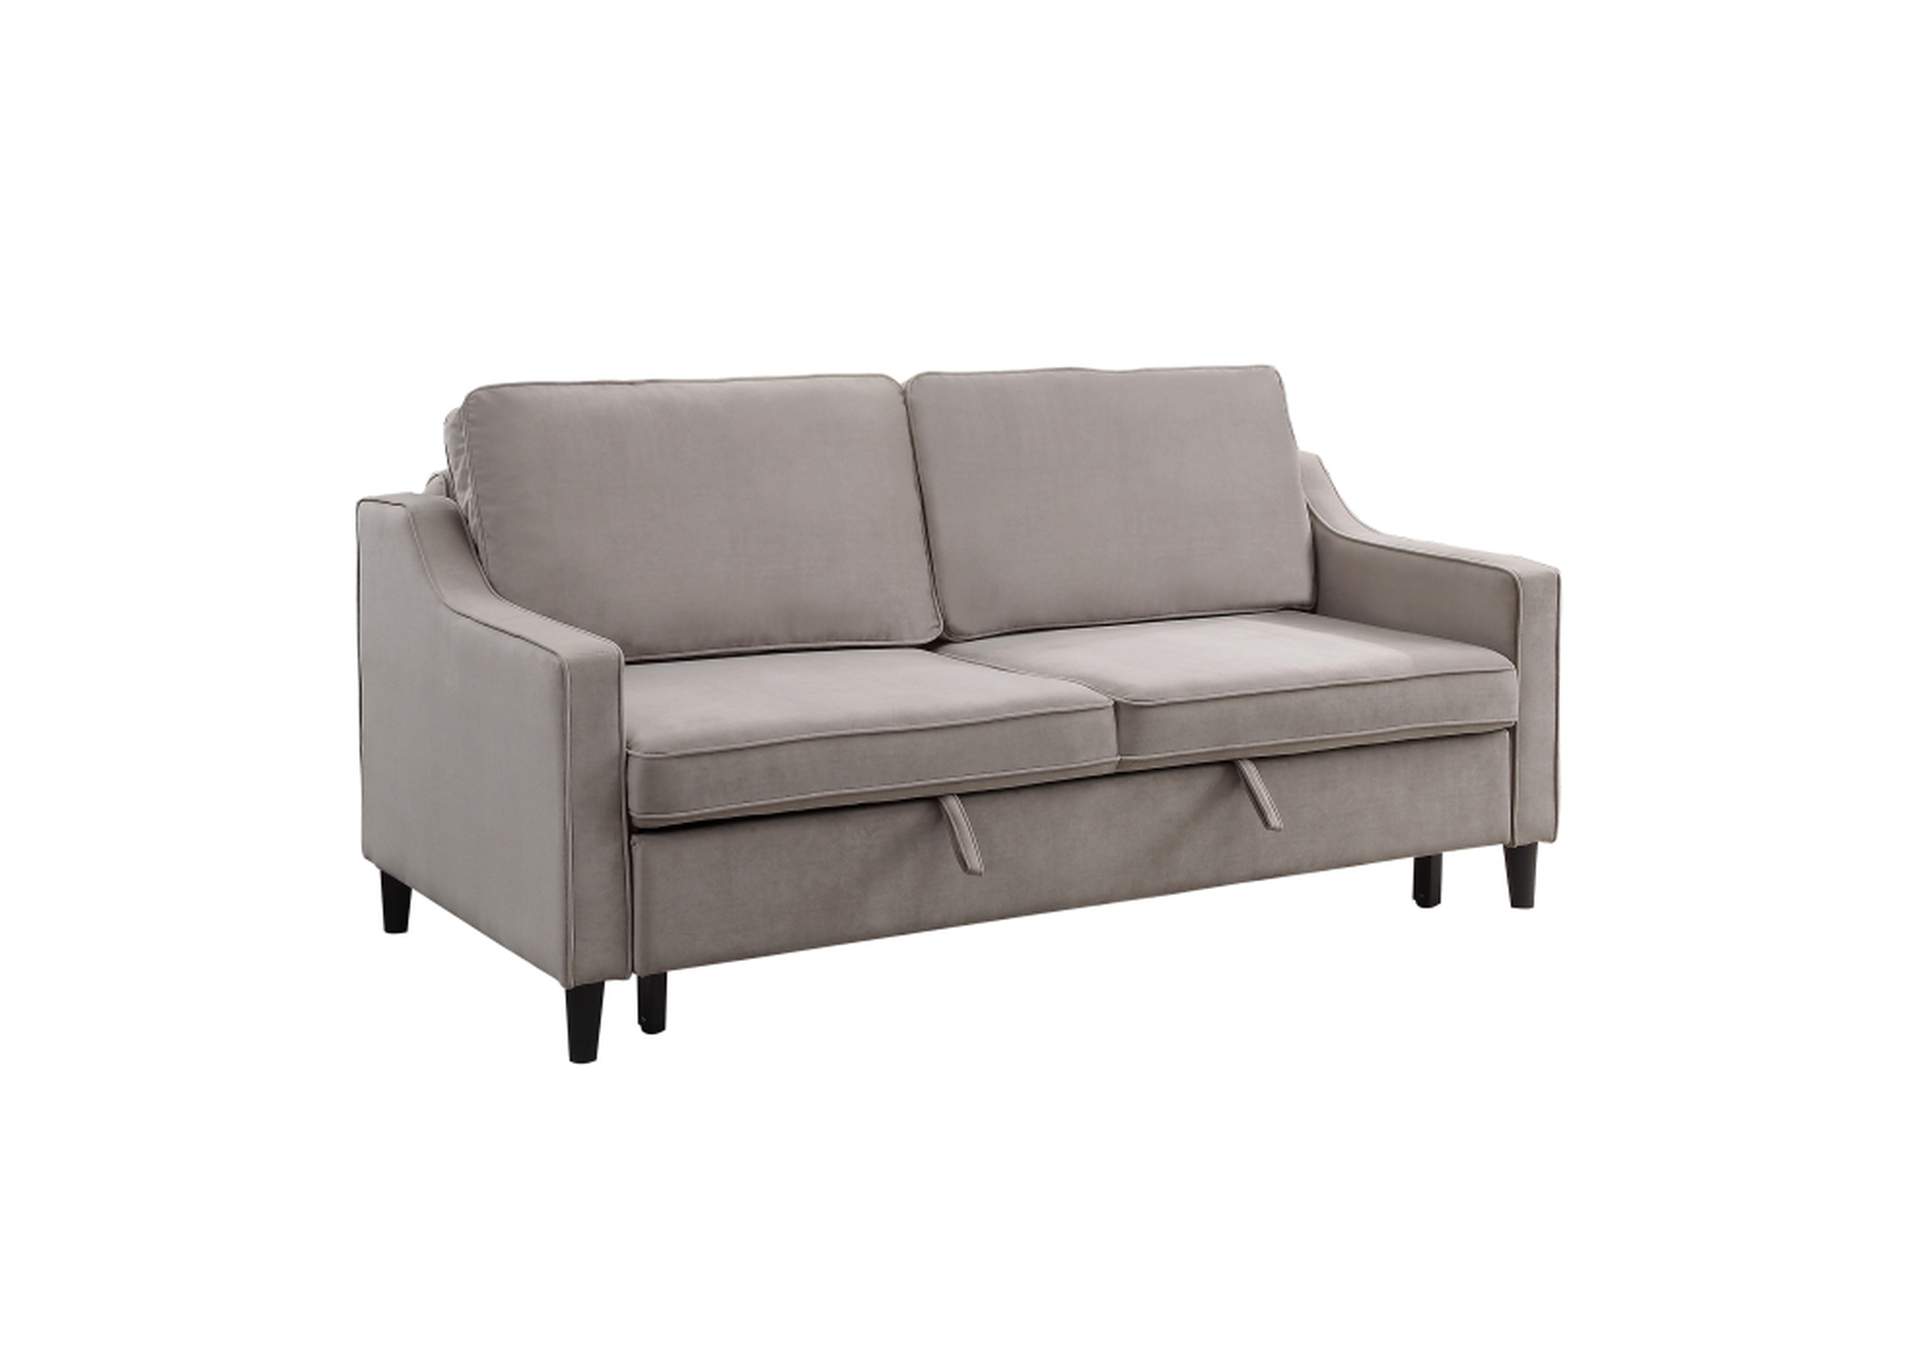 Adelia Convertible Studio Sofa with Pull-out Bed,Homelegance